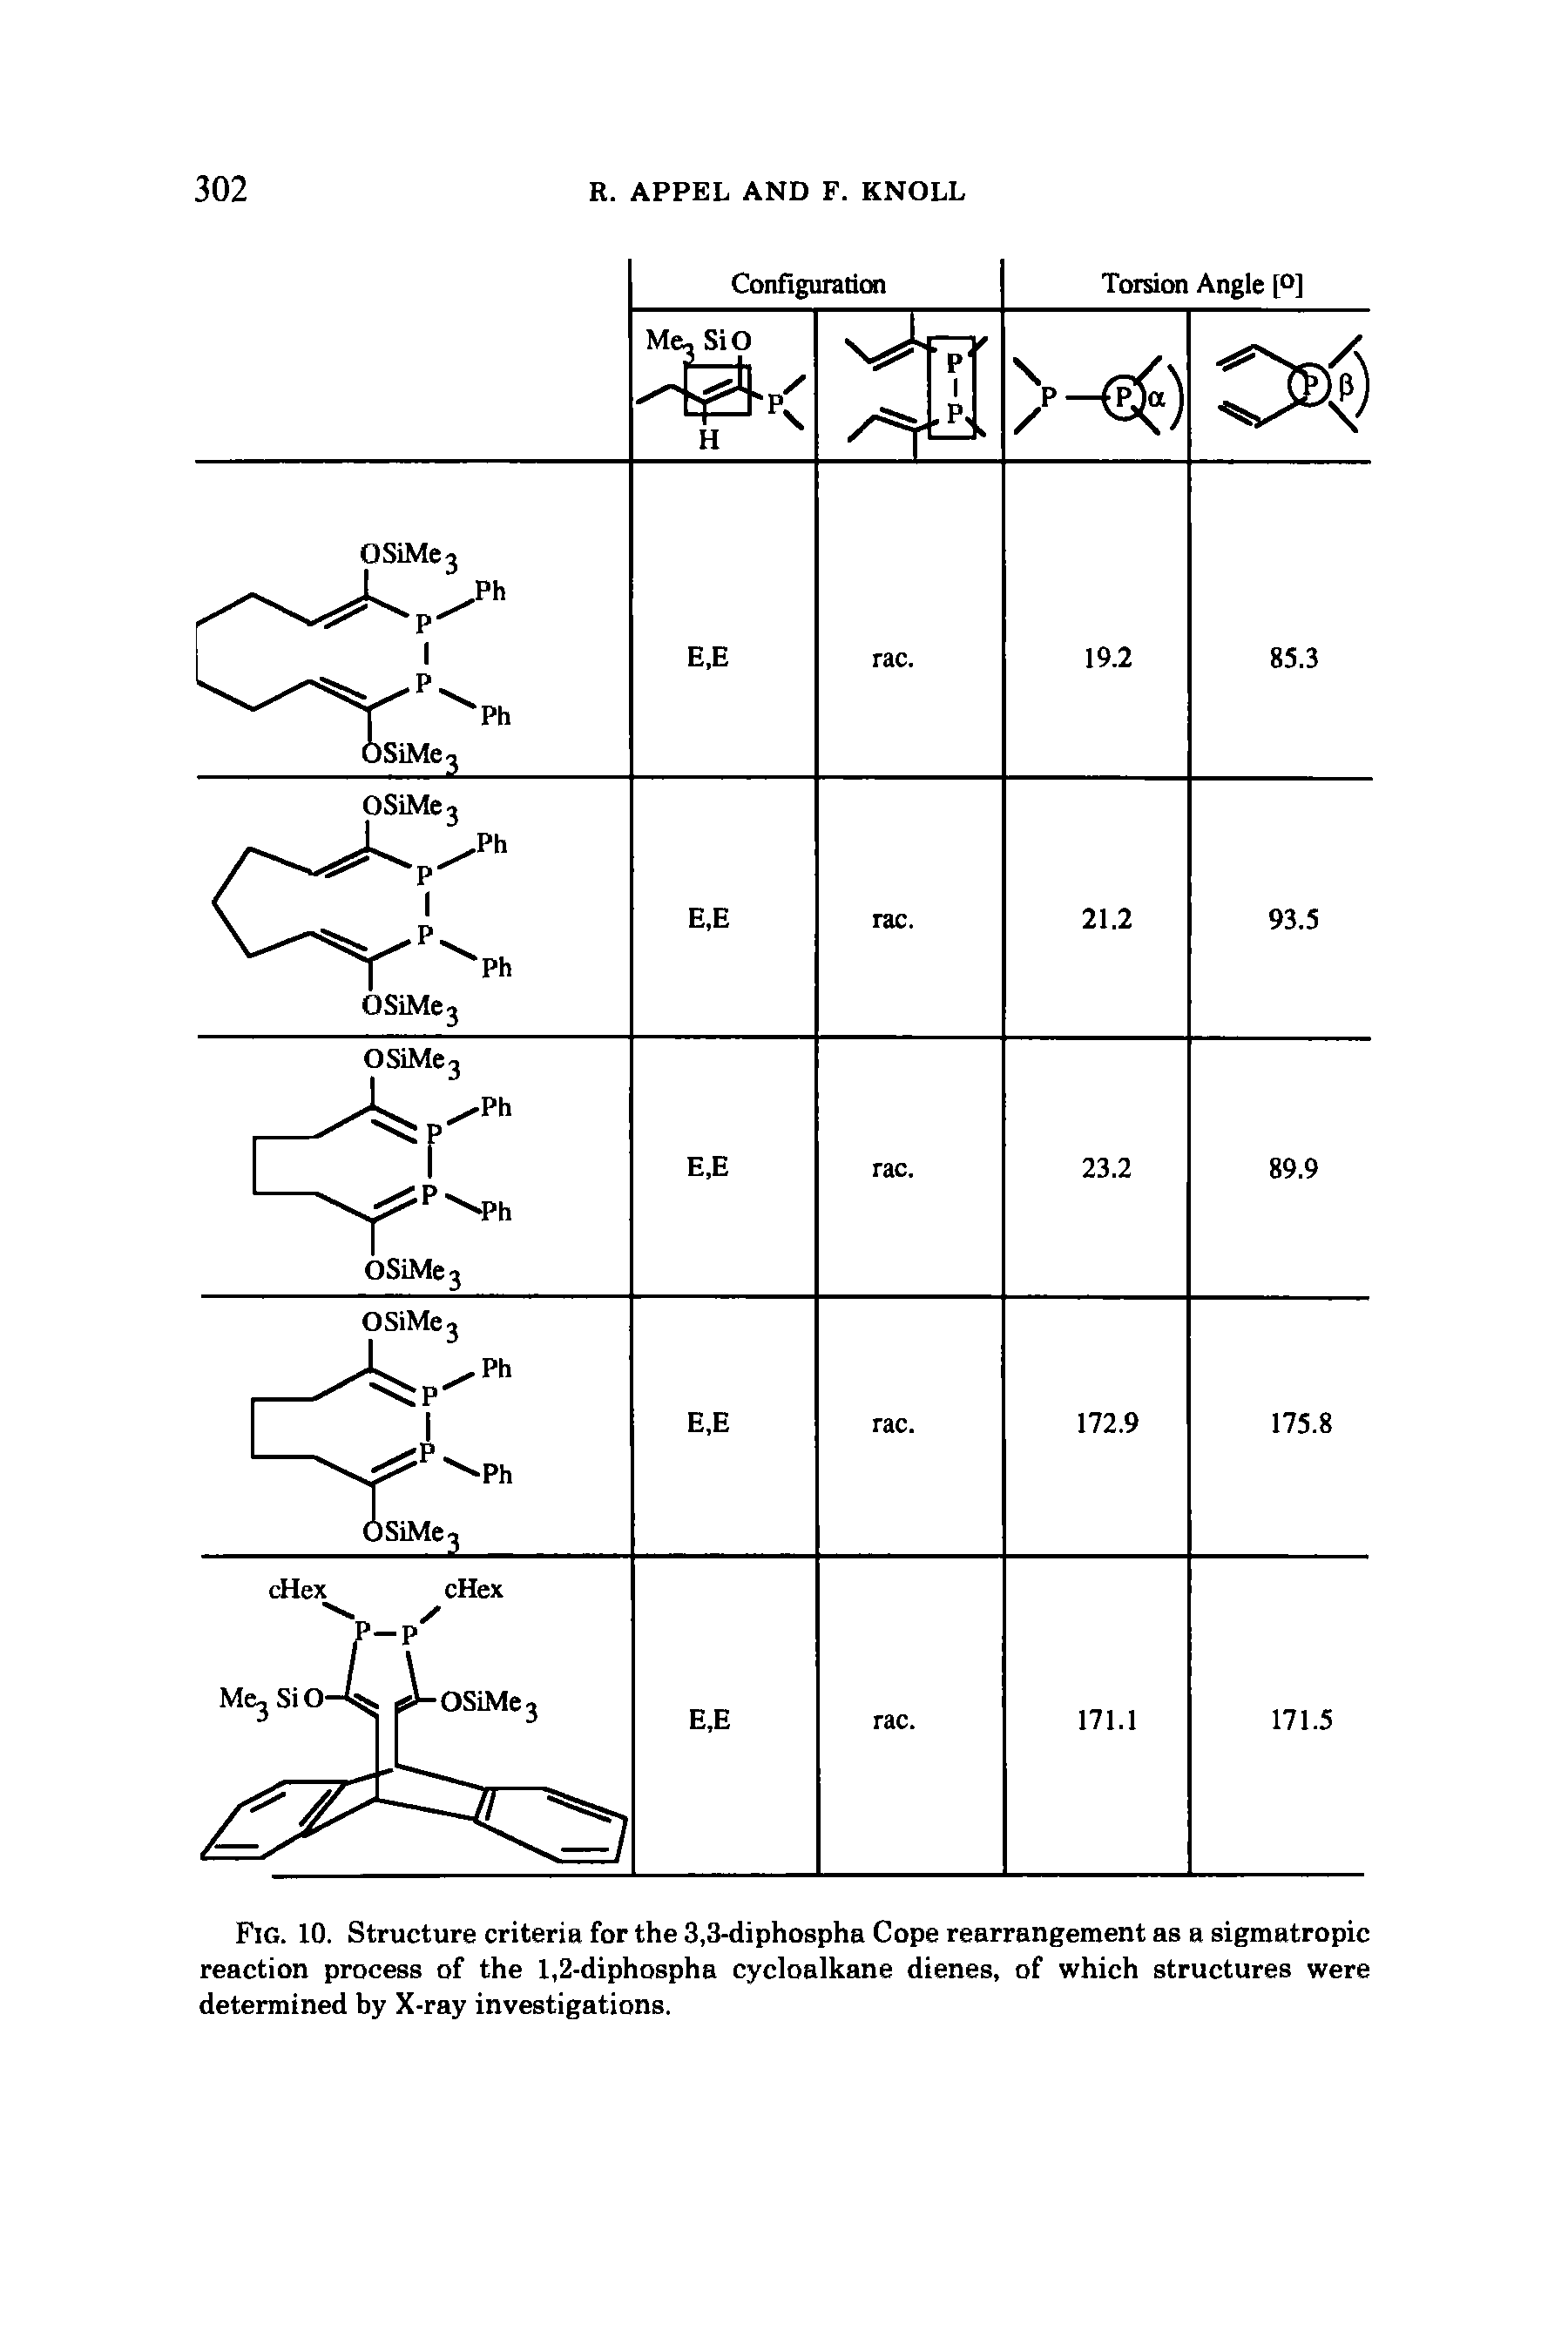 Fig. 10. Structure criteria for the 3,3-diphospha Cope rearrangement as a sigmatropic reaction process of the 1,2-diphospha cycloalkane dienes, of which structures were determined by X-ray investigations.